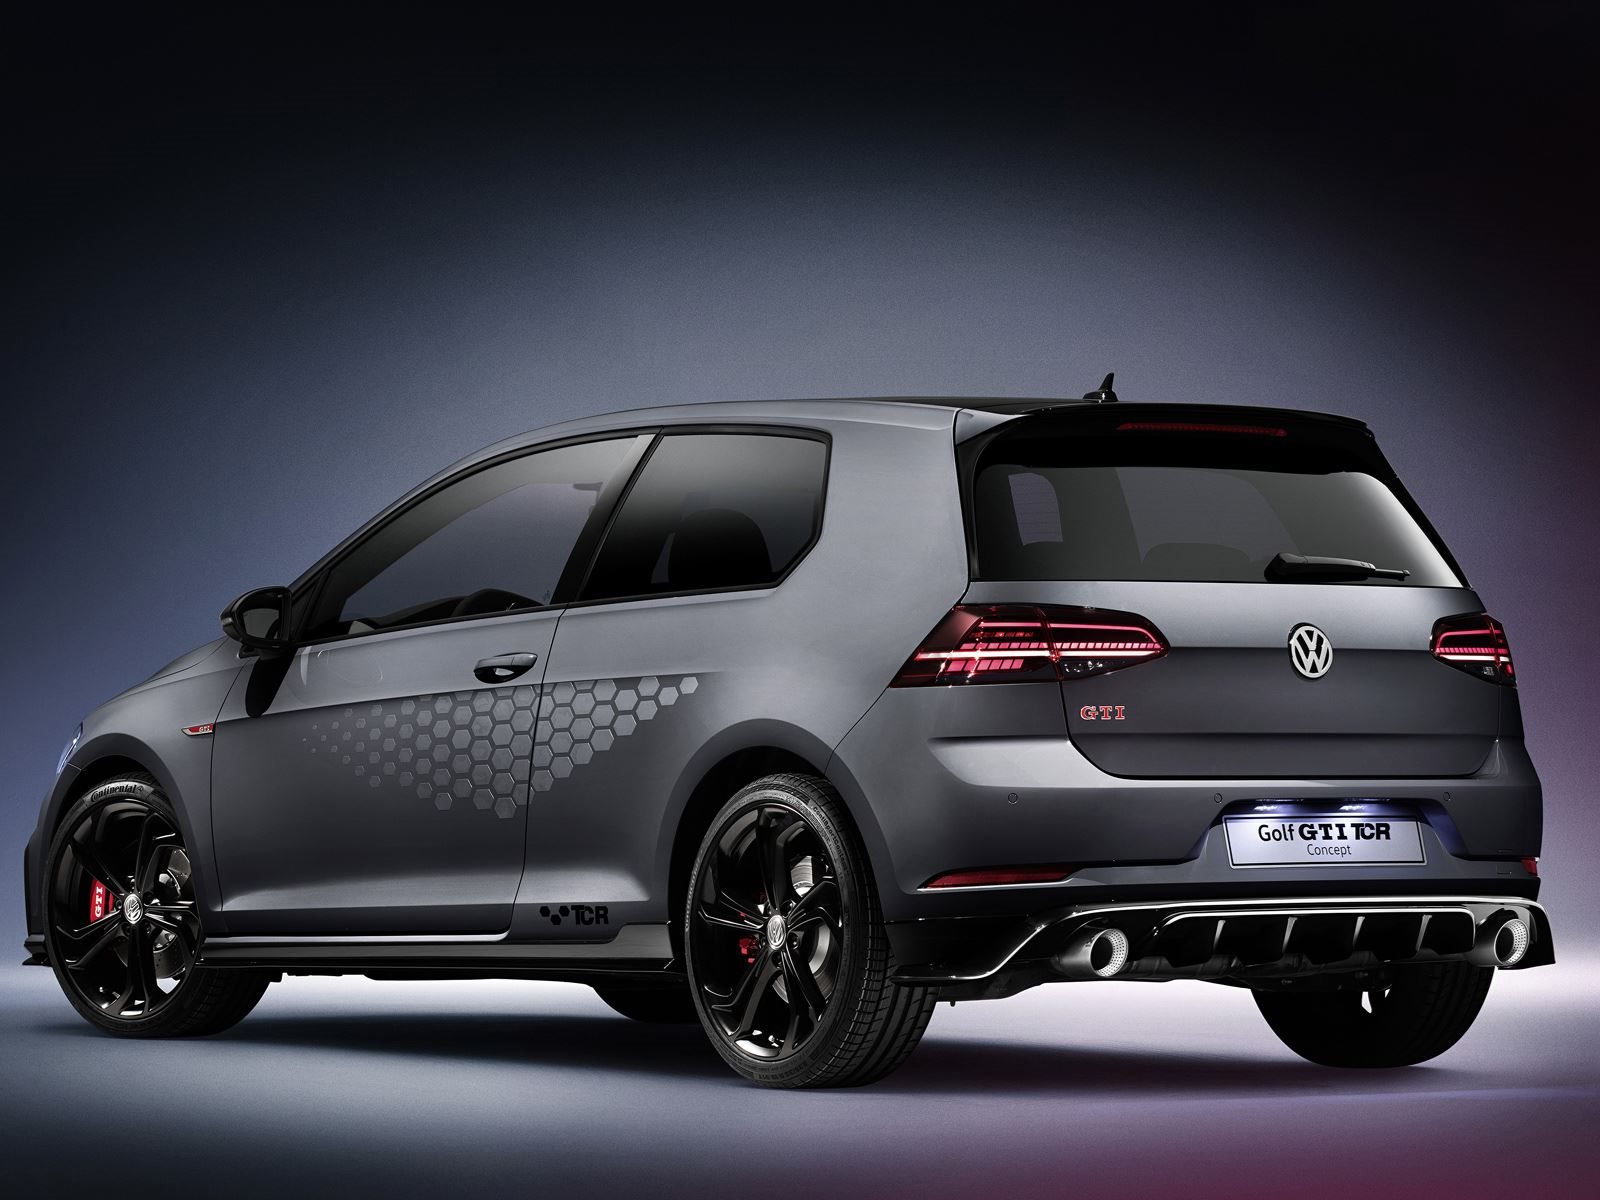 Volkswagen Golf GTI TCR Unveiled With Race Car DNA | CarBuzz